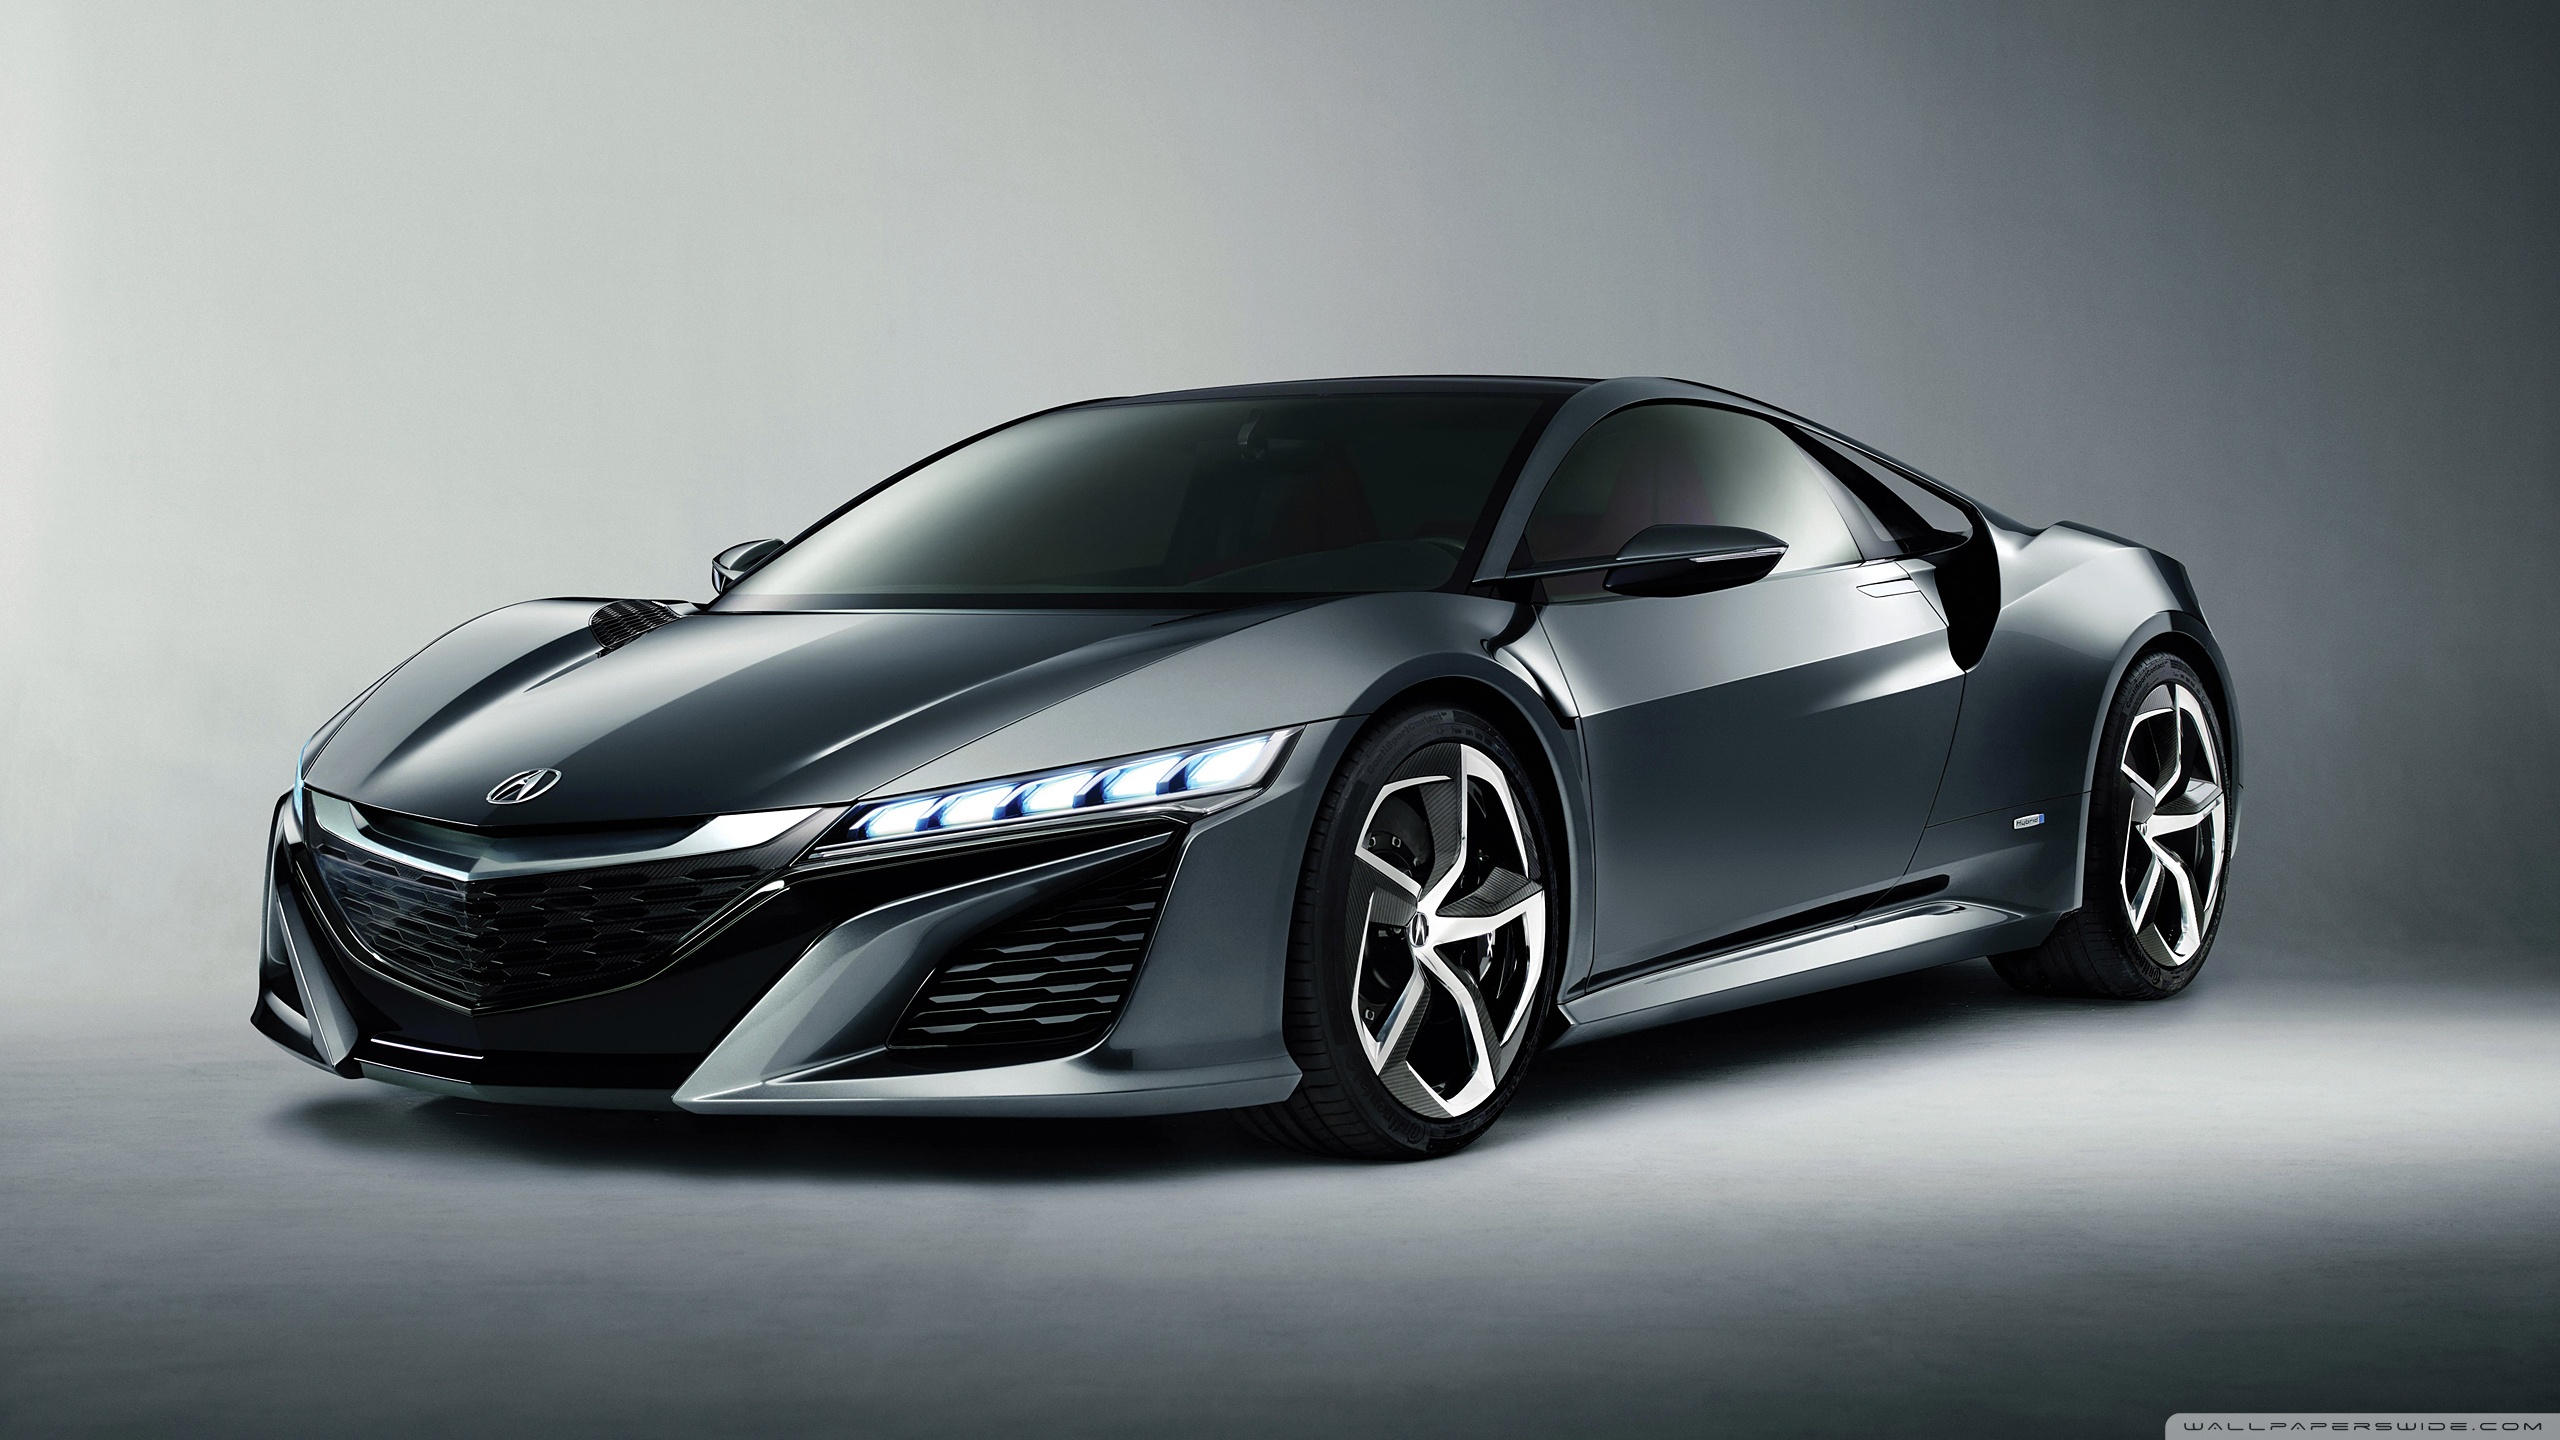 2013 Acura Nsx Concept Ultra Hd Desktop Background Wallpaper For 4k Uhd Tv Multi Display Dual Monitor Tablet Smartphone